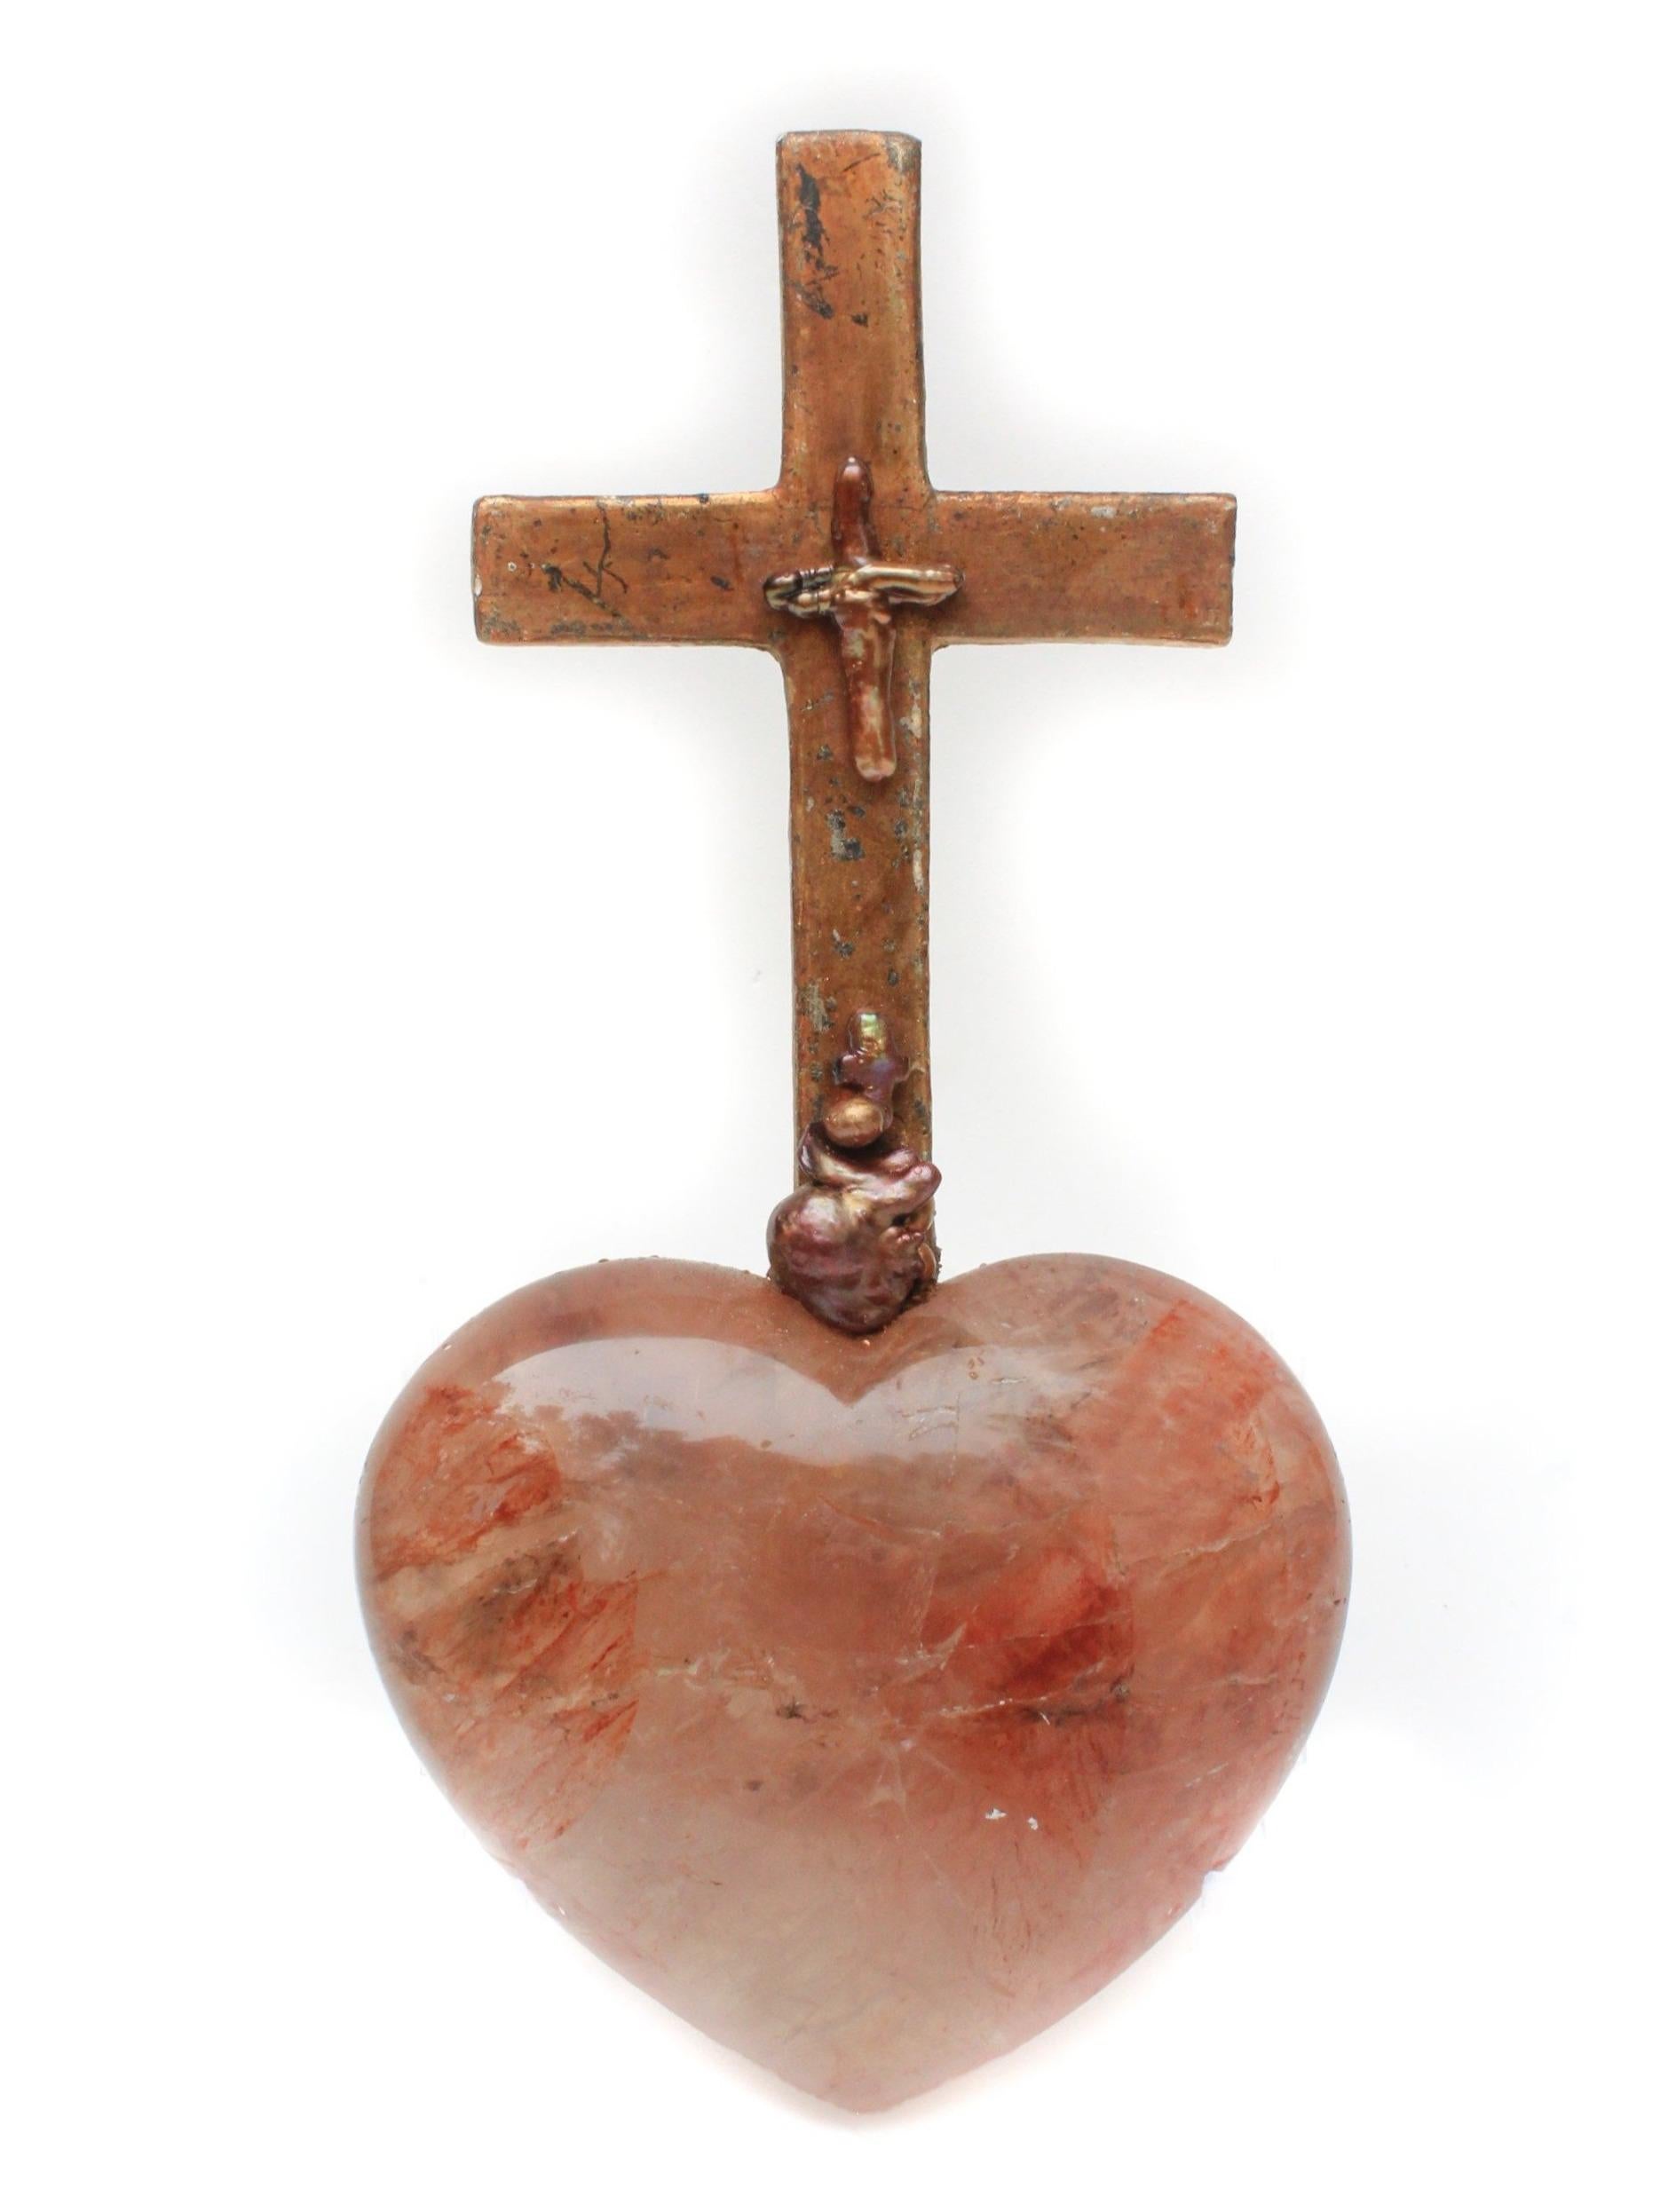 18th Century Italian cross mounted on a polished red hematoid quartz heart and adorned with natural-forming baroque pearls and a cross-shaped baroque pearl. The piece is inspired by 